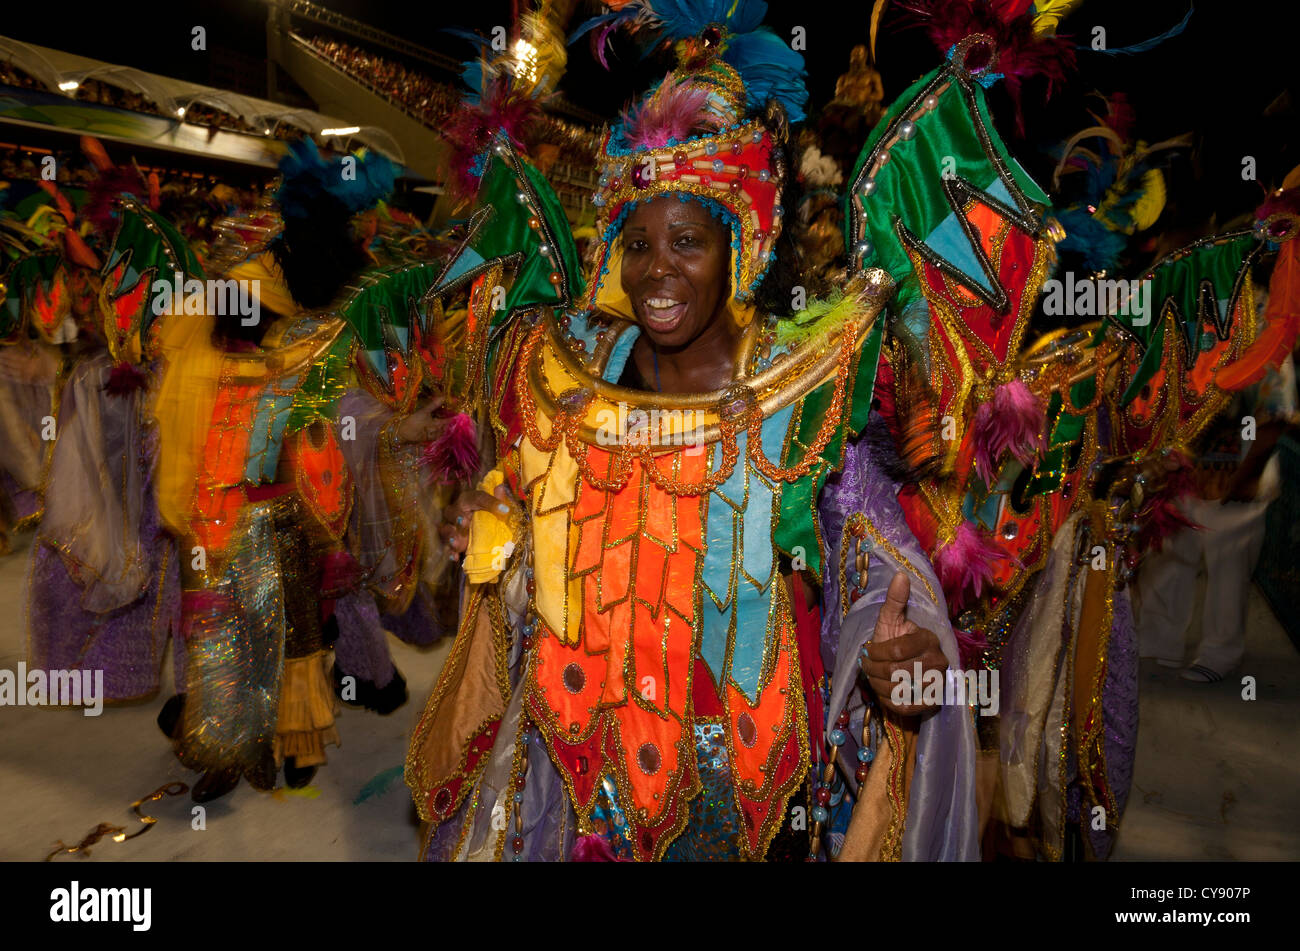 Woman in Yellow Colourful Costume During Carnival Parade in the Sambadrome Rio de Janeiro Brazil Stock Photo